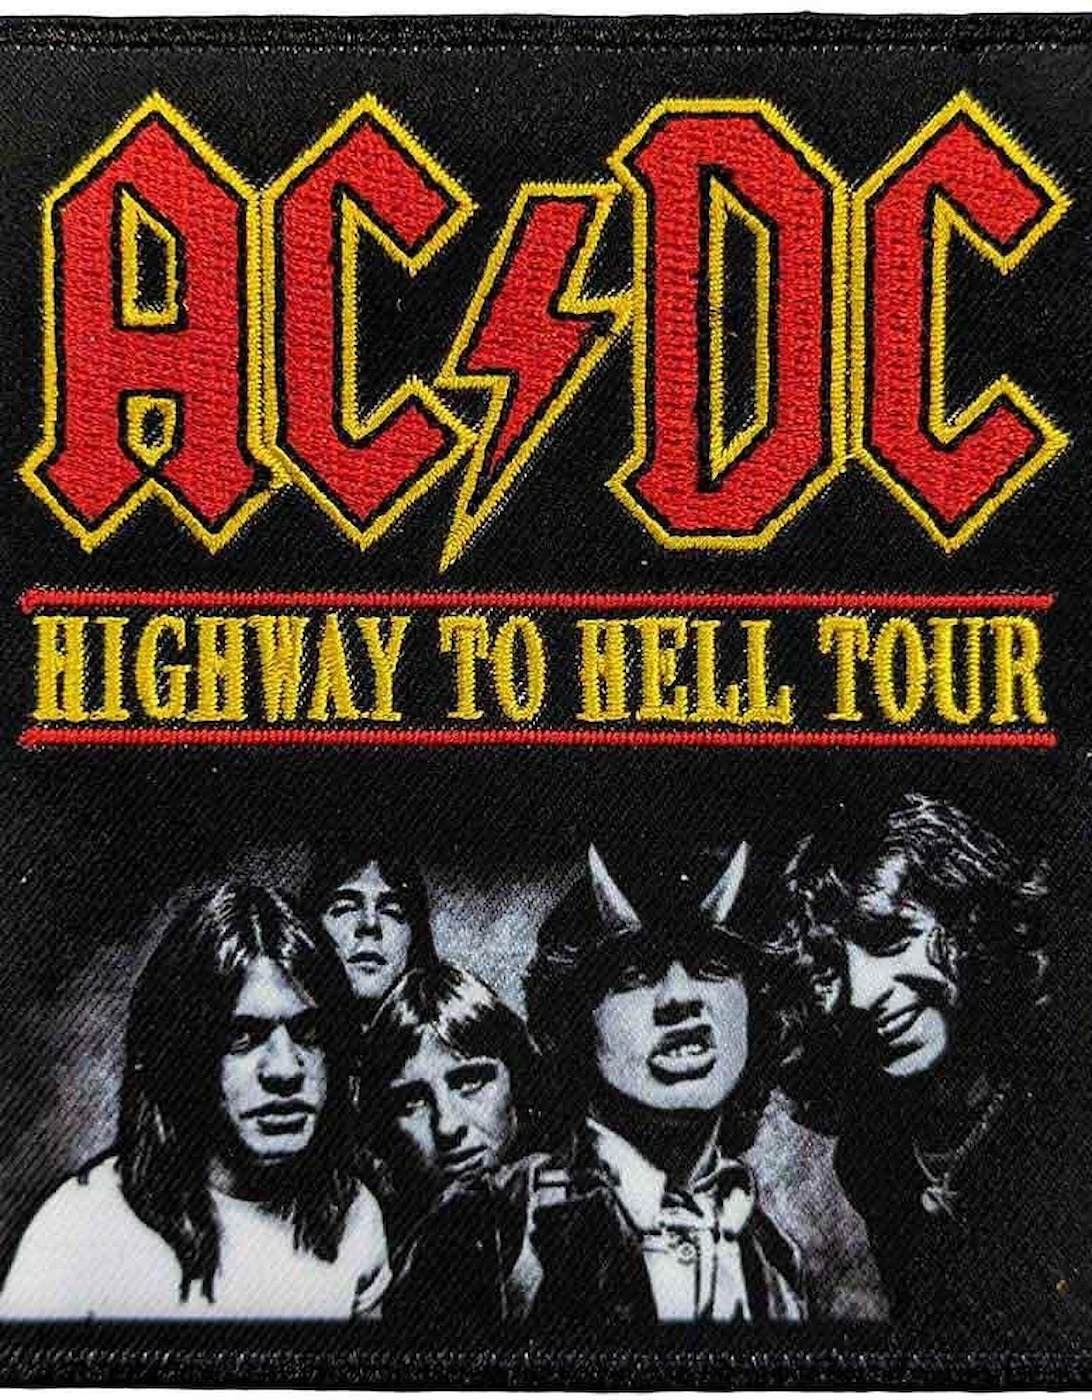 Highway To Hell Tour Woven Iron On Patch, 2 of 1